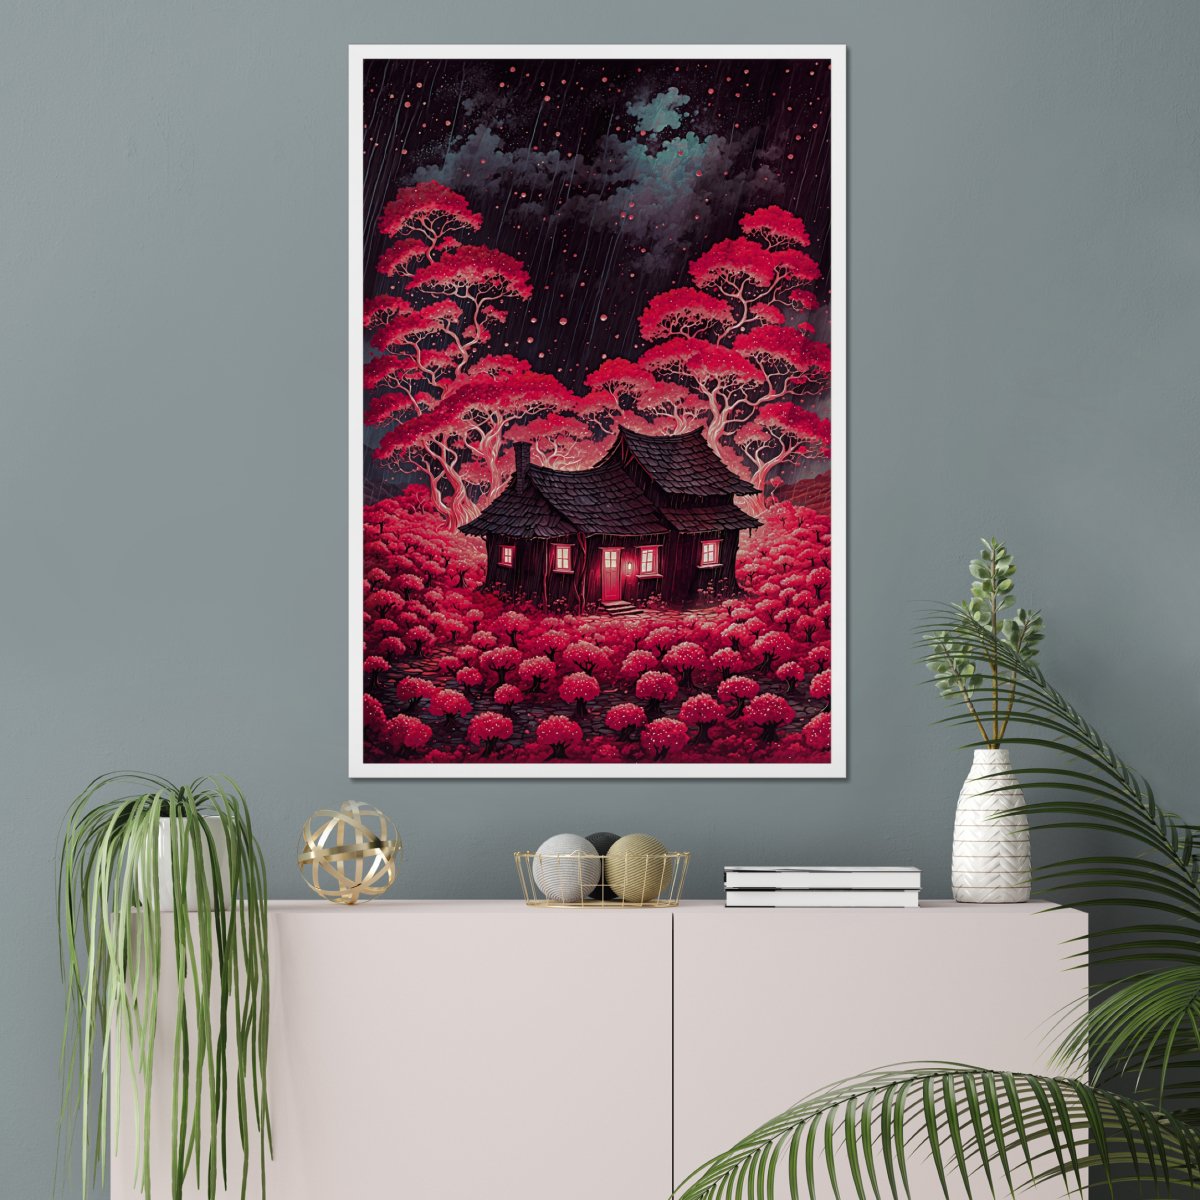 Ruby flora beauty - Art print - Poster - Ever colorful